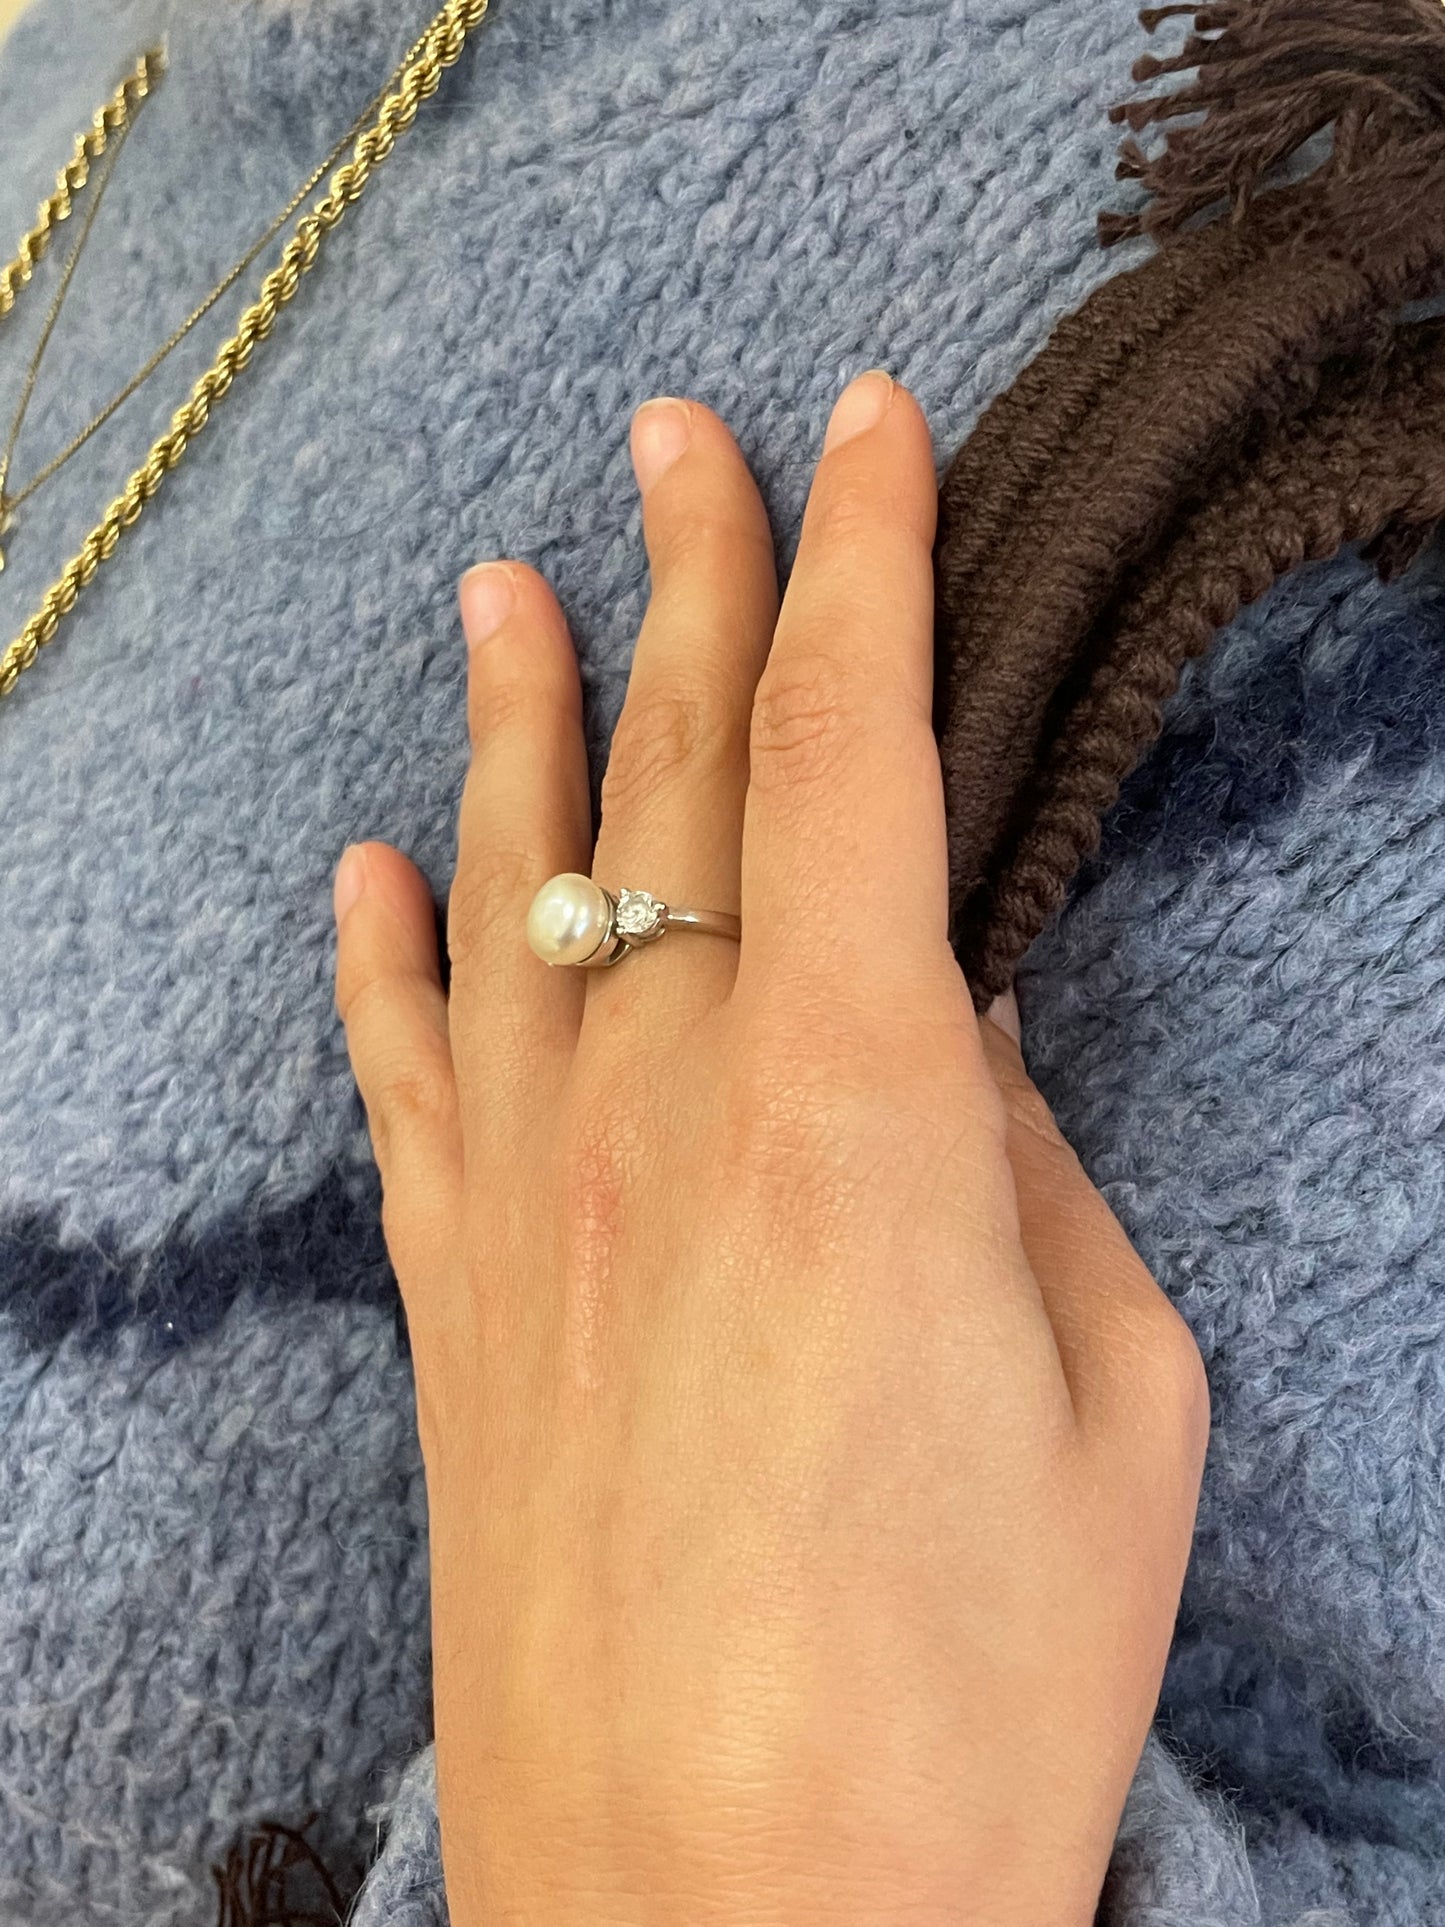 Freshwater Pearl and White Stone Ring in 14CT White Gold